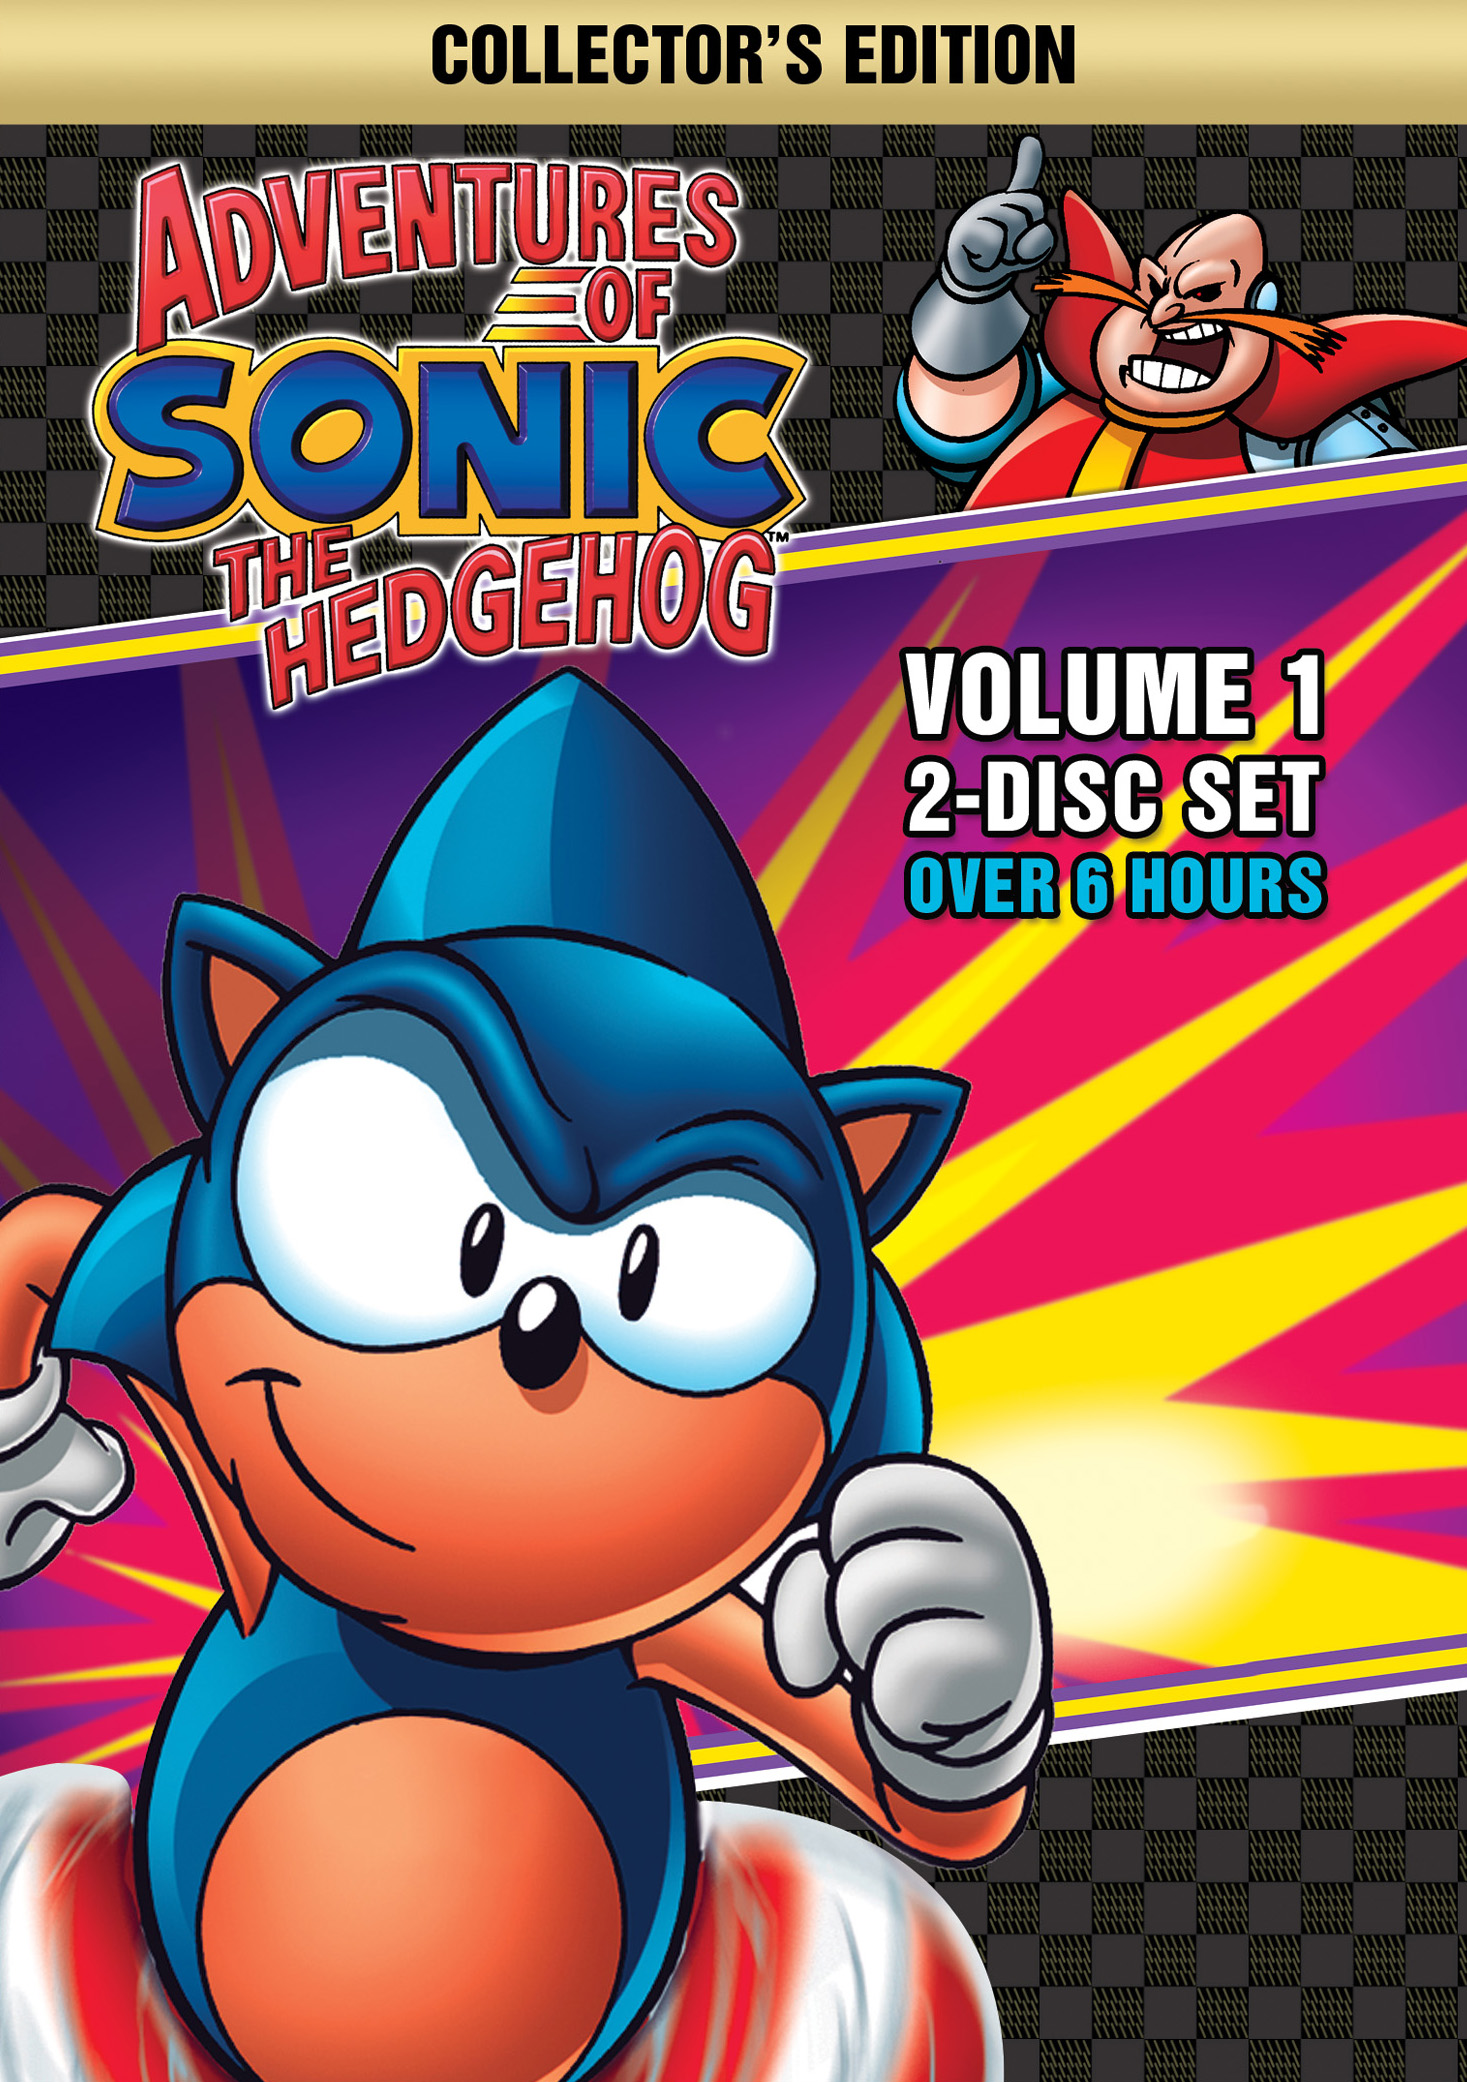 Adventures of Sonic the Hedgehog, Vol. 1 [Collector's Edition] [2